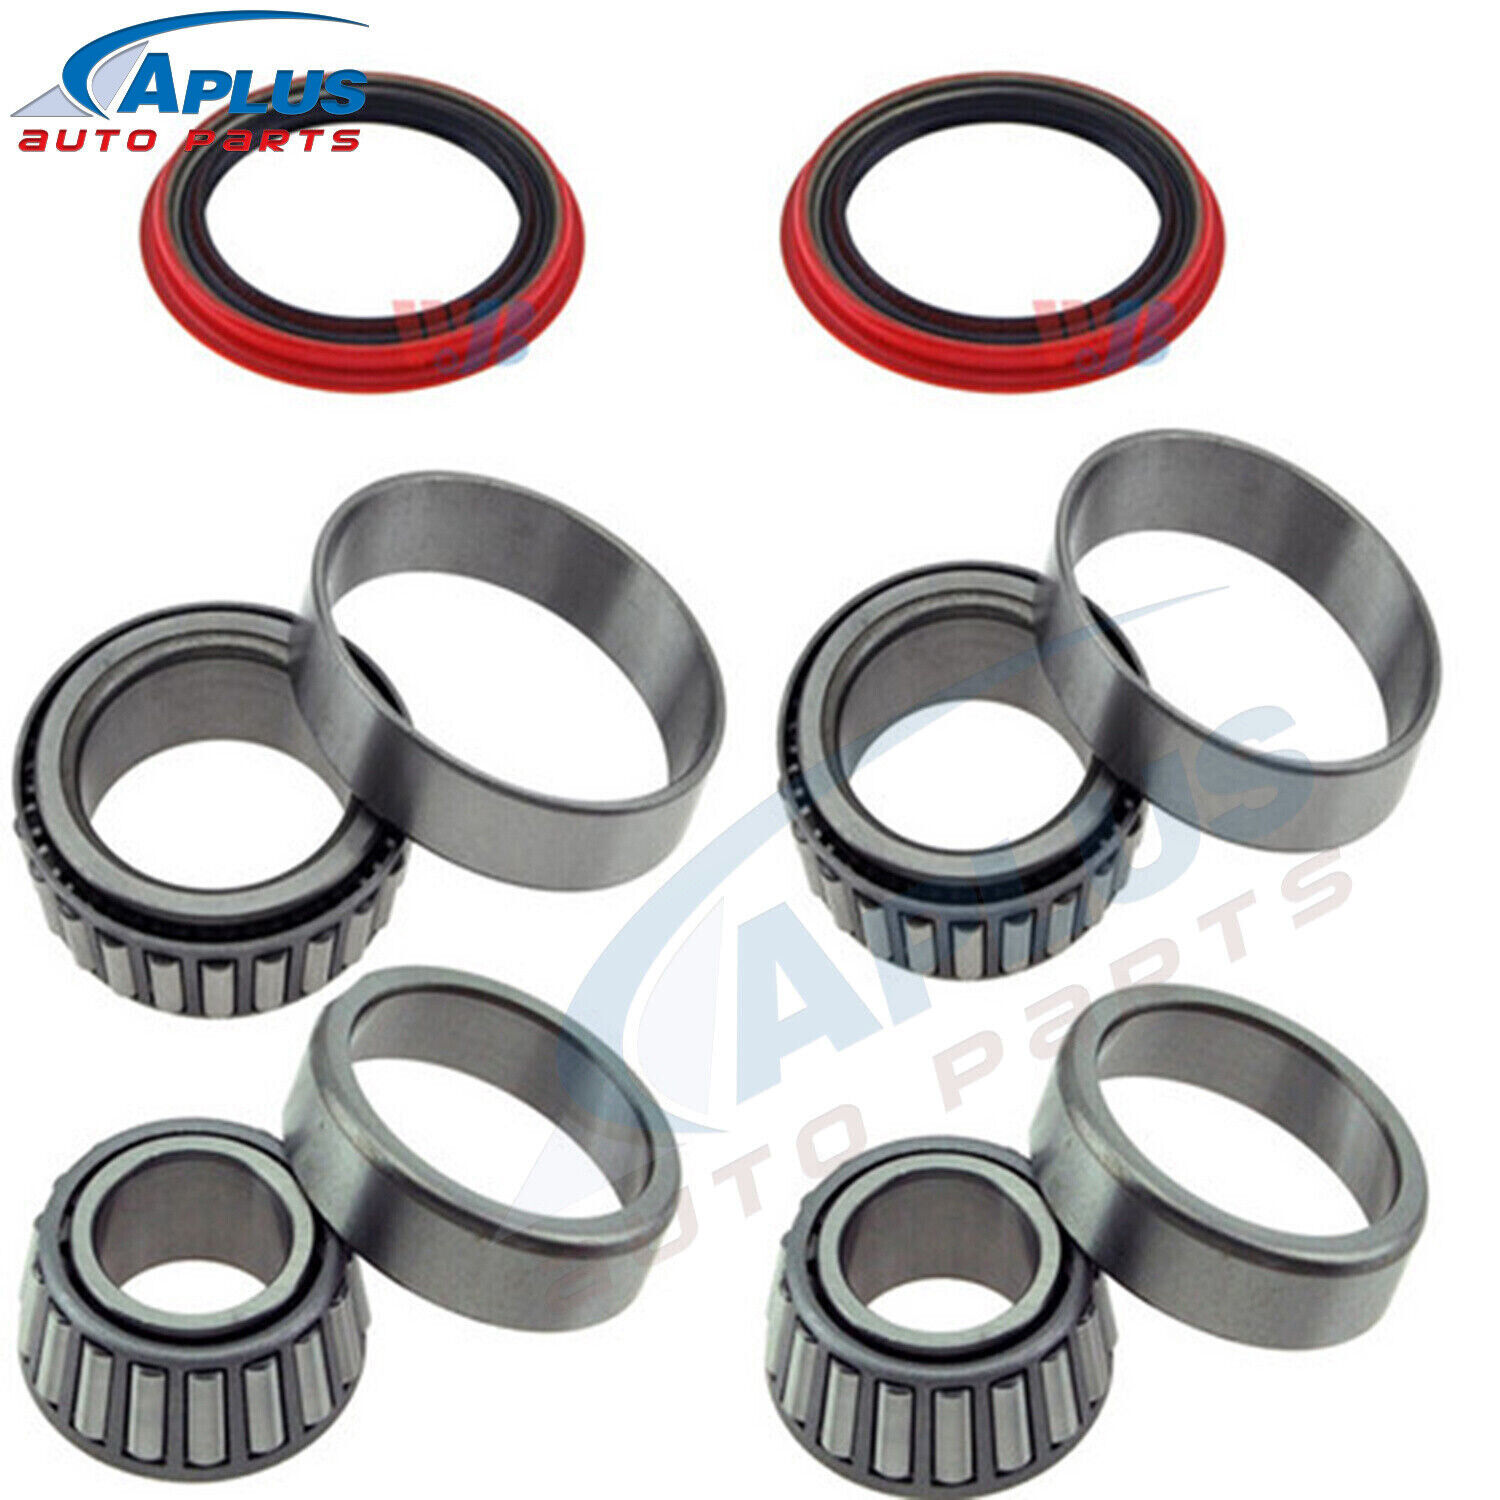 6 Front Wheel Bearing and Race Set & Seal Kit For Chevy S10 Blazer GMC S15 Jimmy